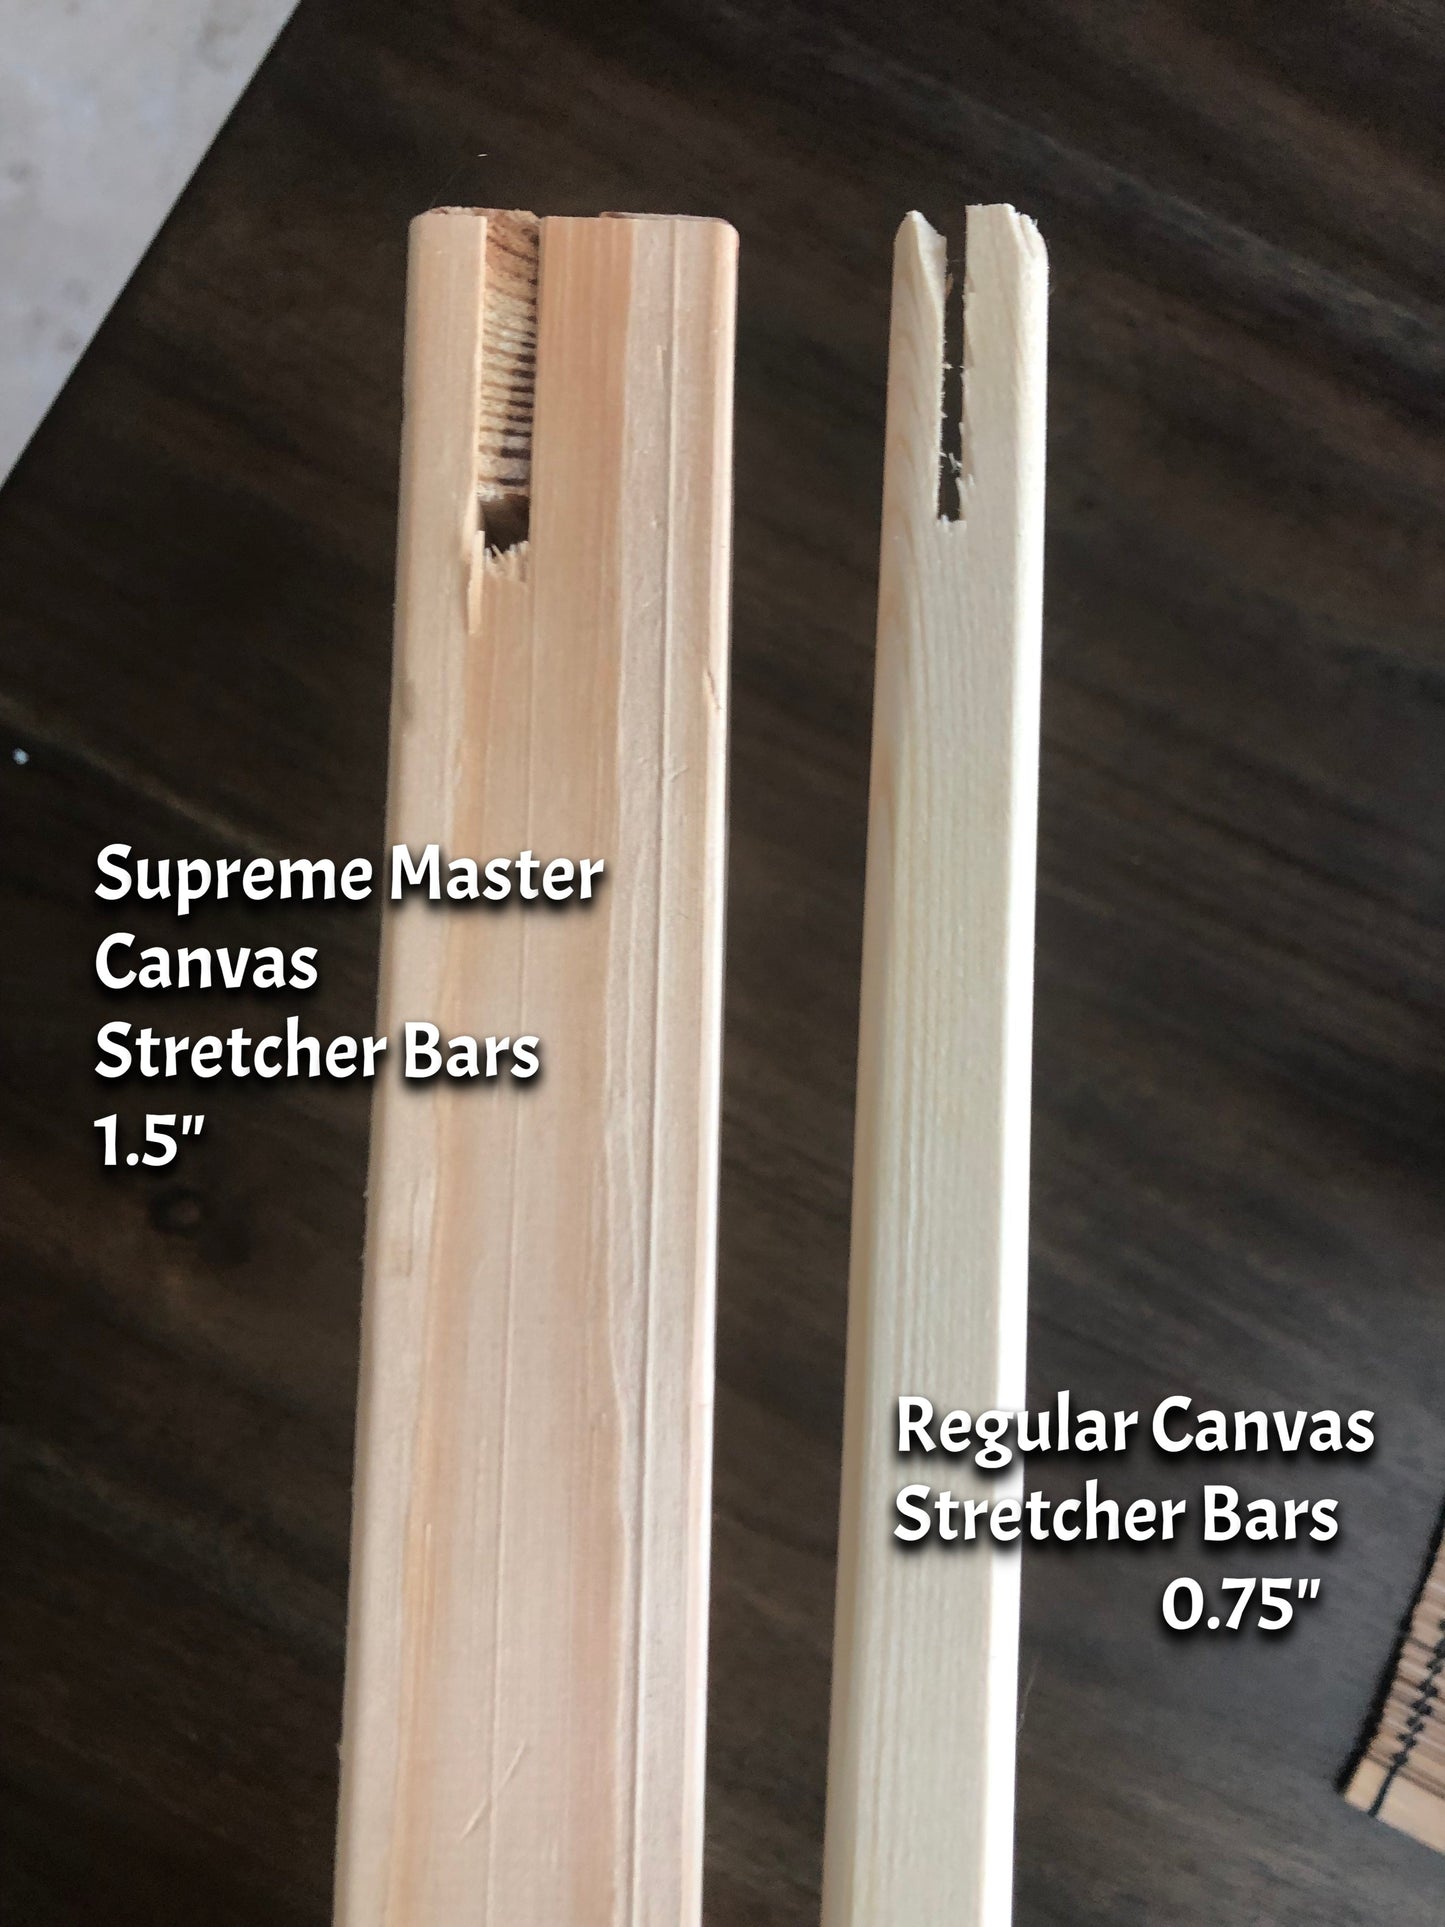 SUPREME MASTER CANVAS "Catoro's Shelte" #1,  Limited to 5 only!